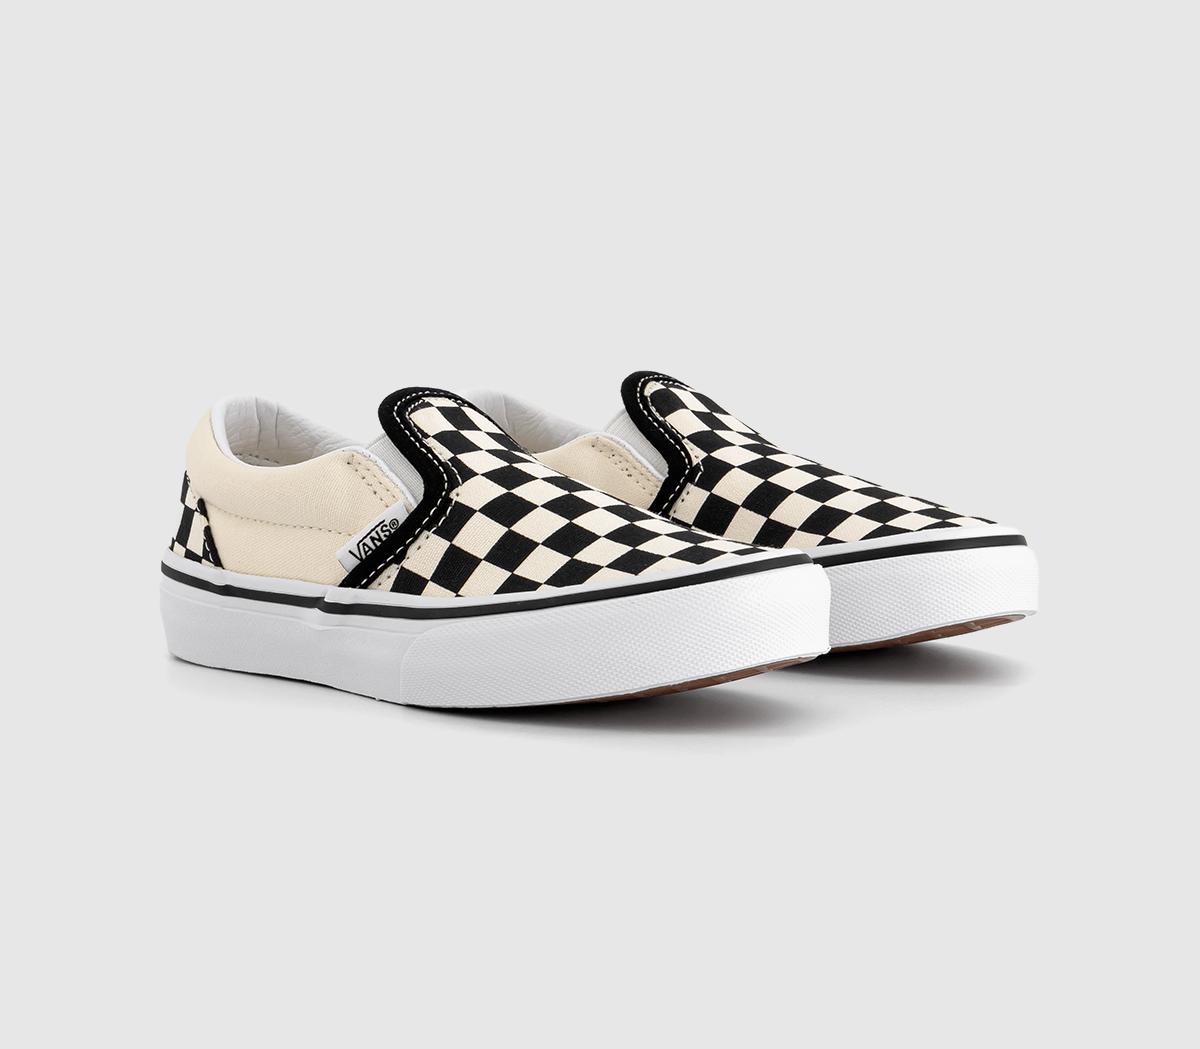 Vans Kids Black And White Checkerboard Classic Slip On Trainers, Size: 11 Youth